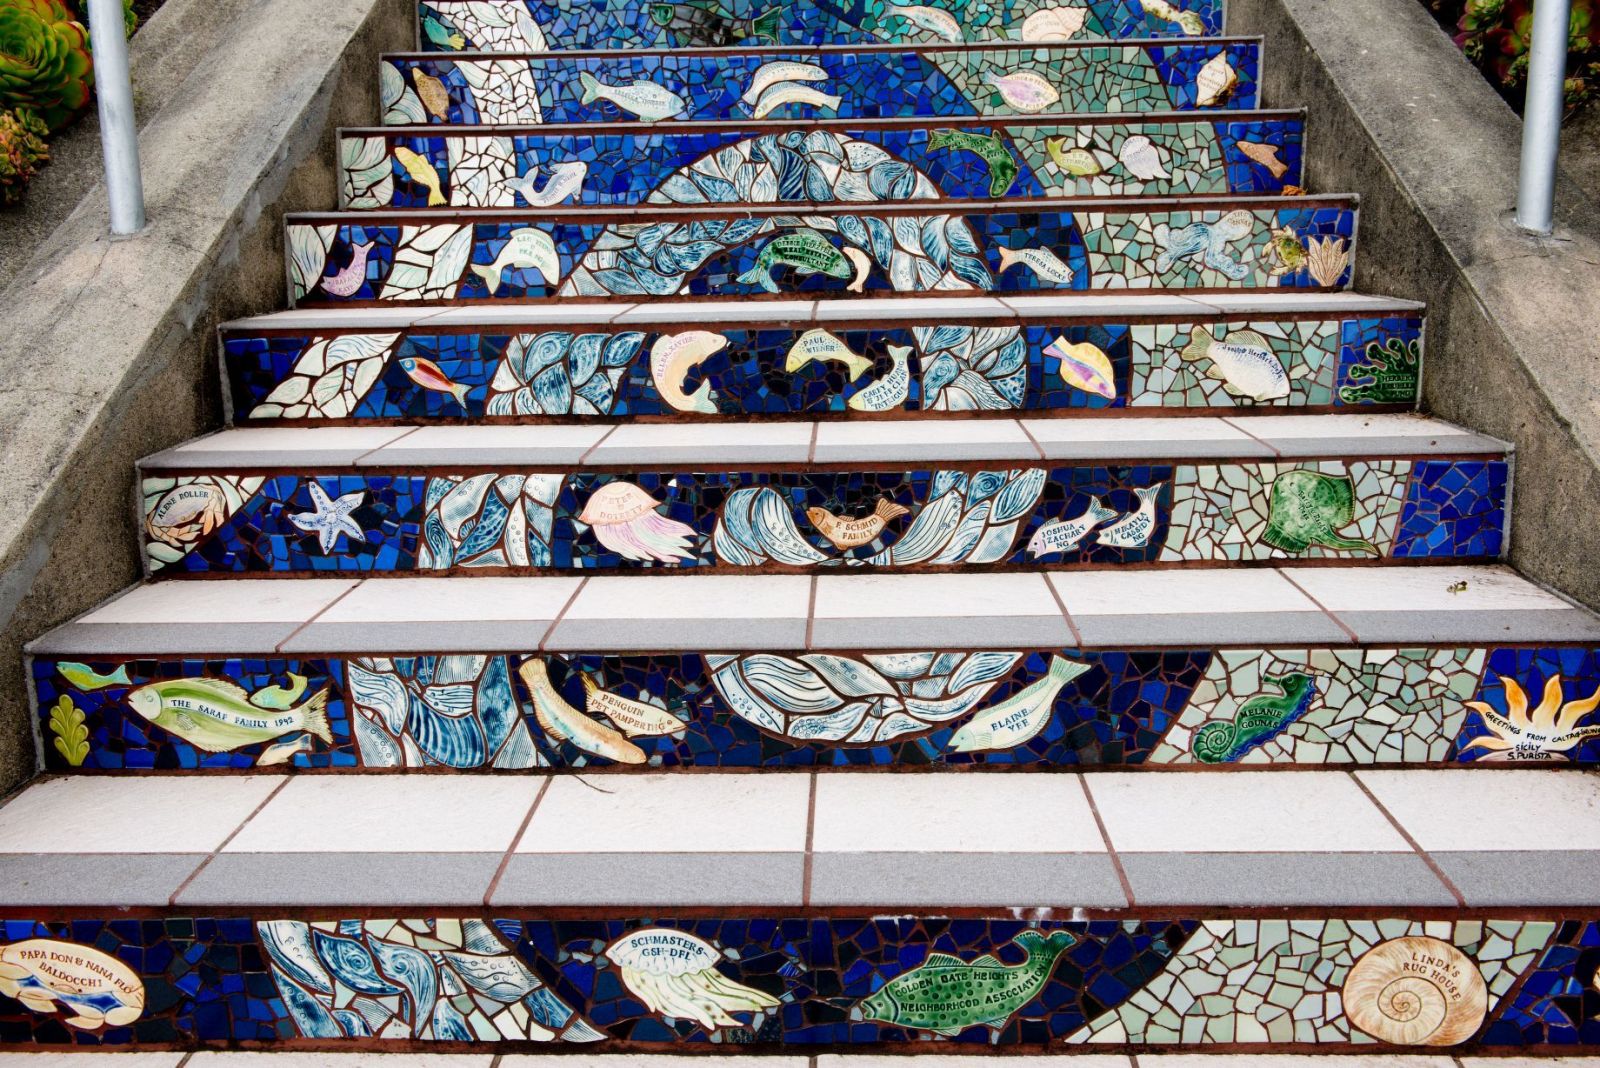 16th Avenue Steps in San Francisco by Aileen Barr and Colette Crutcher